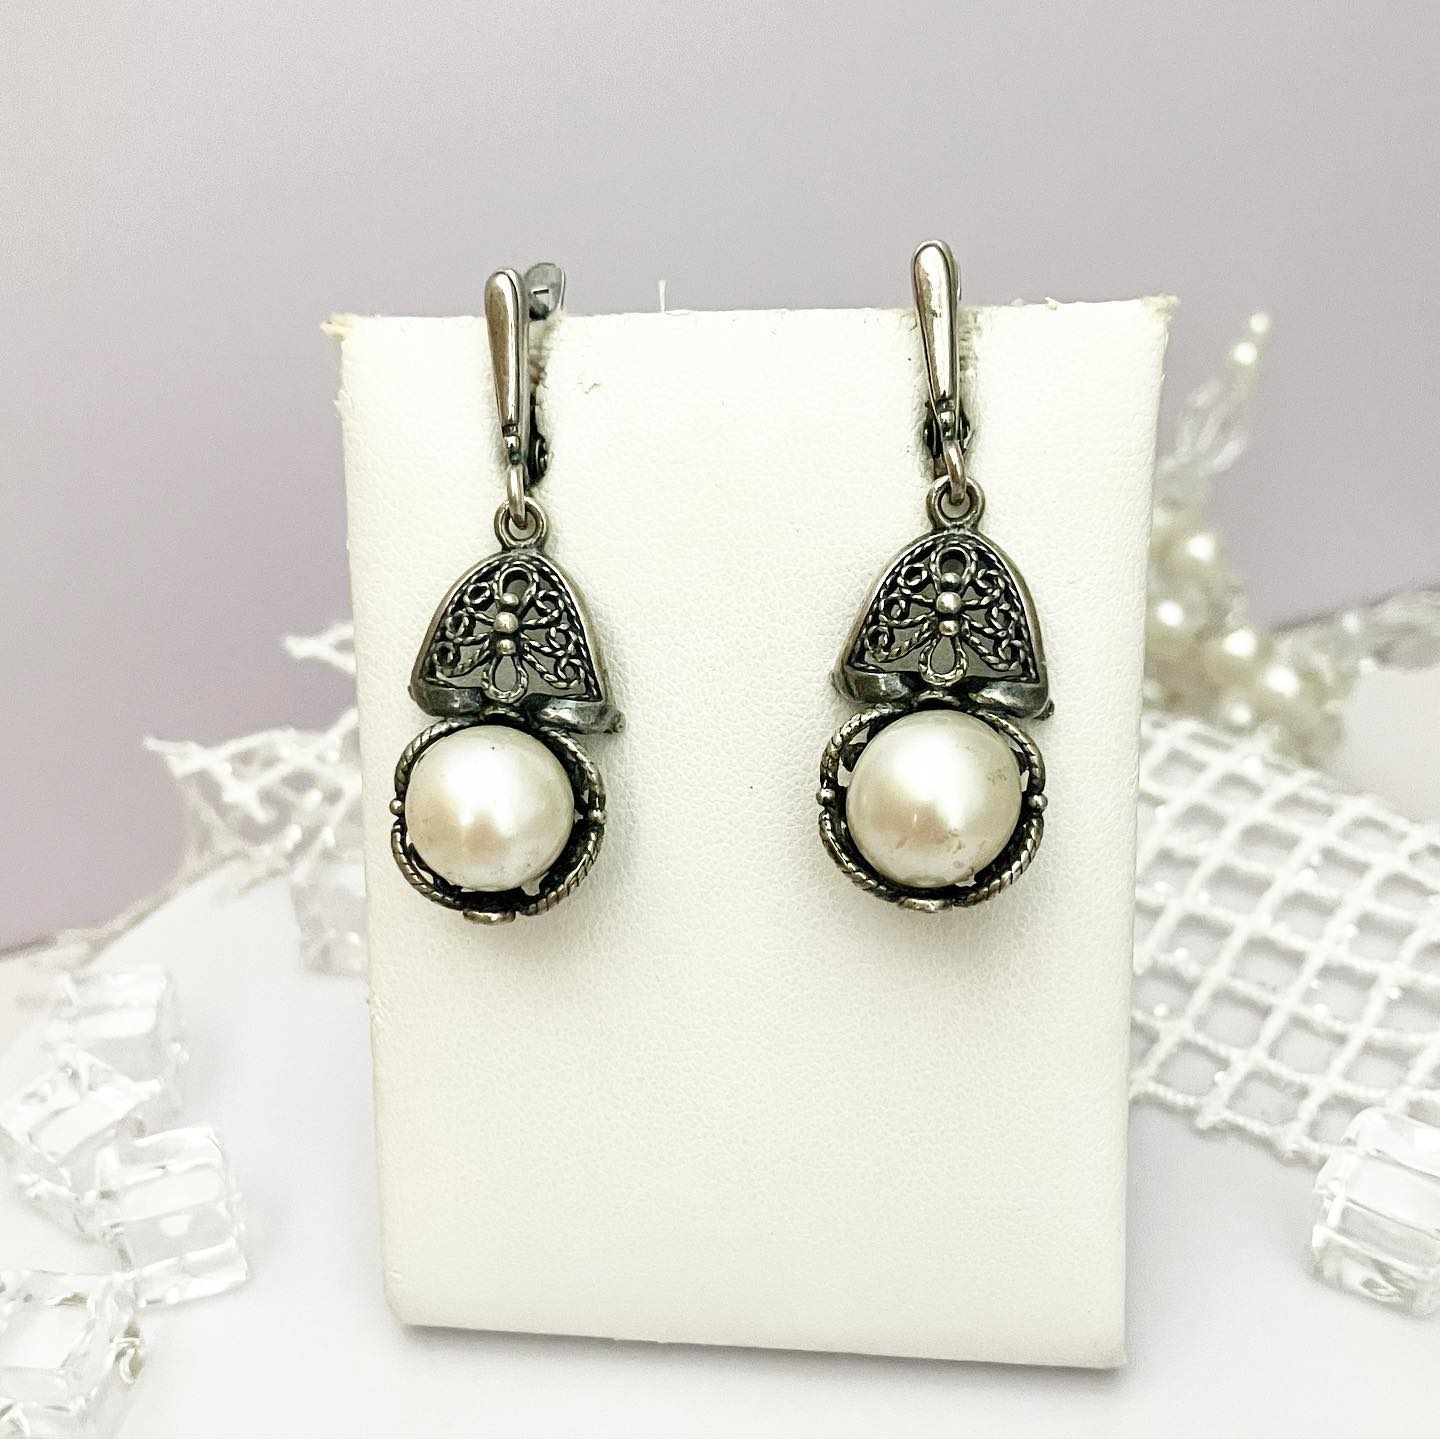 Earrings silver plated medical steel with pearls.